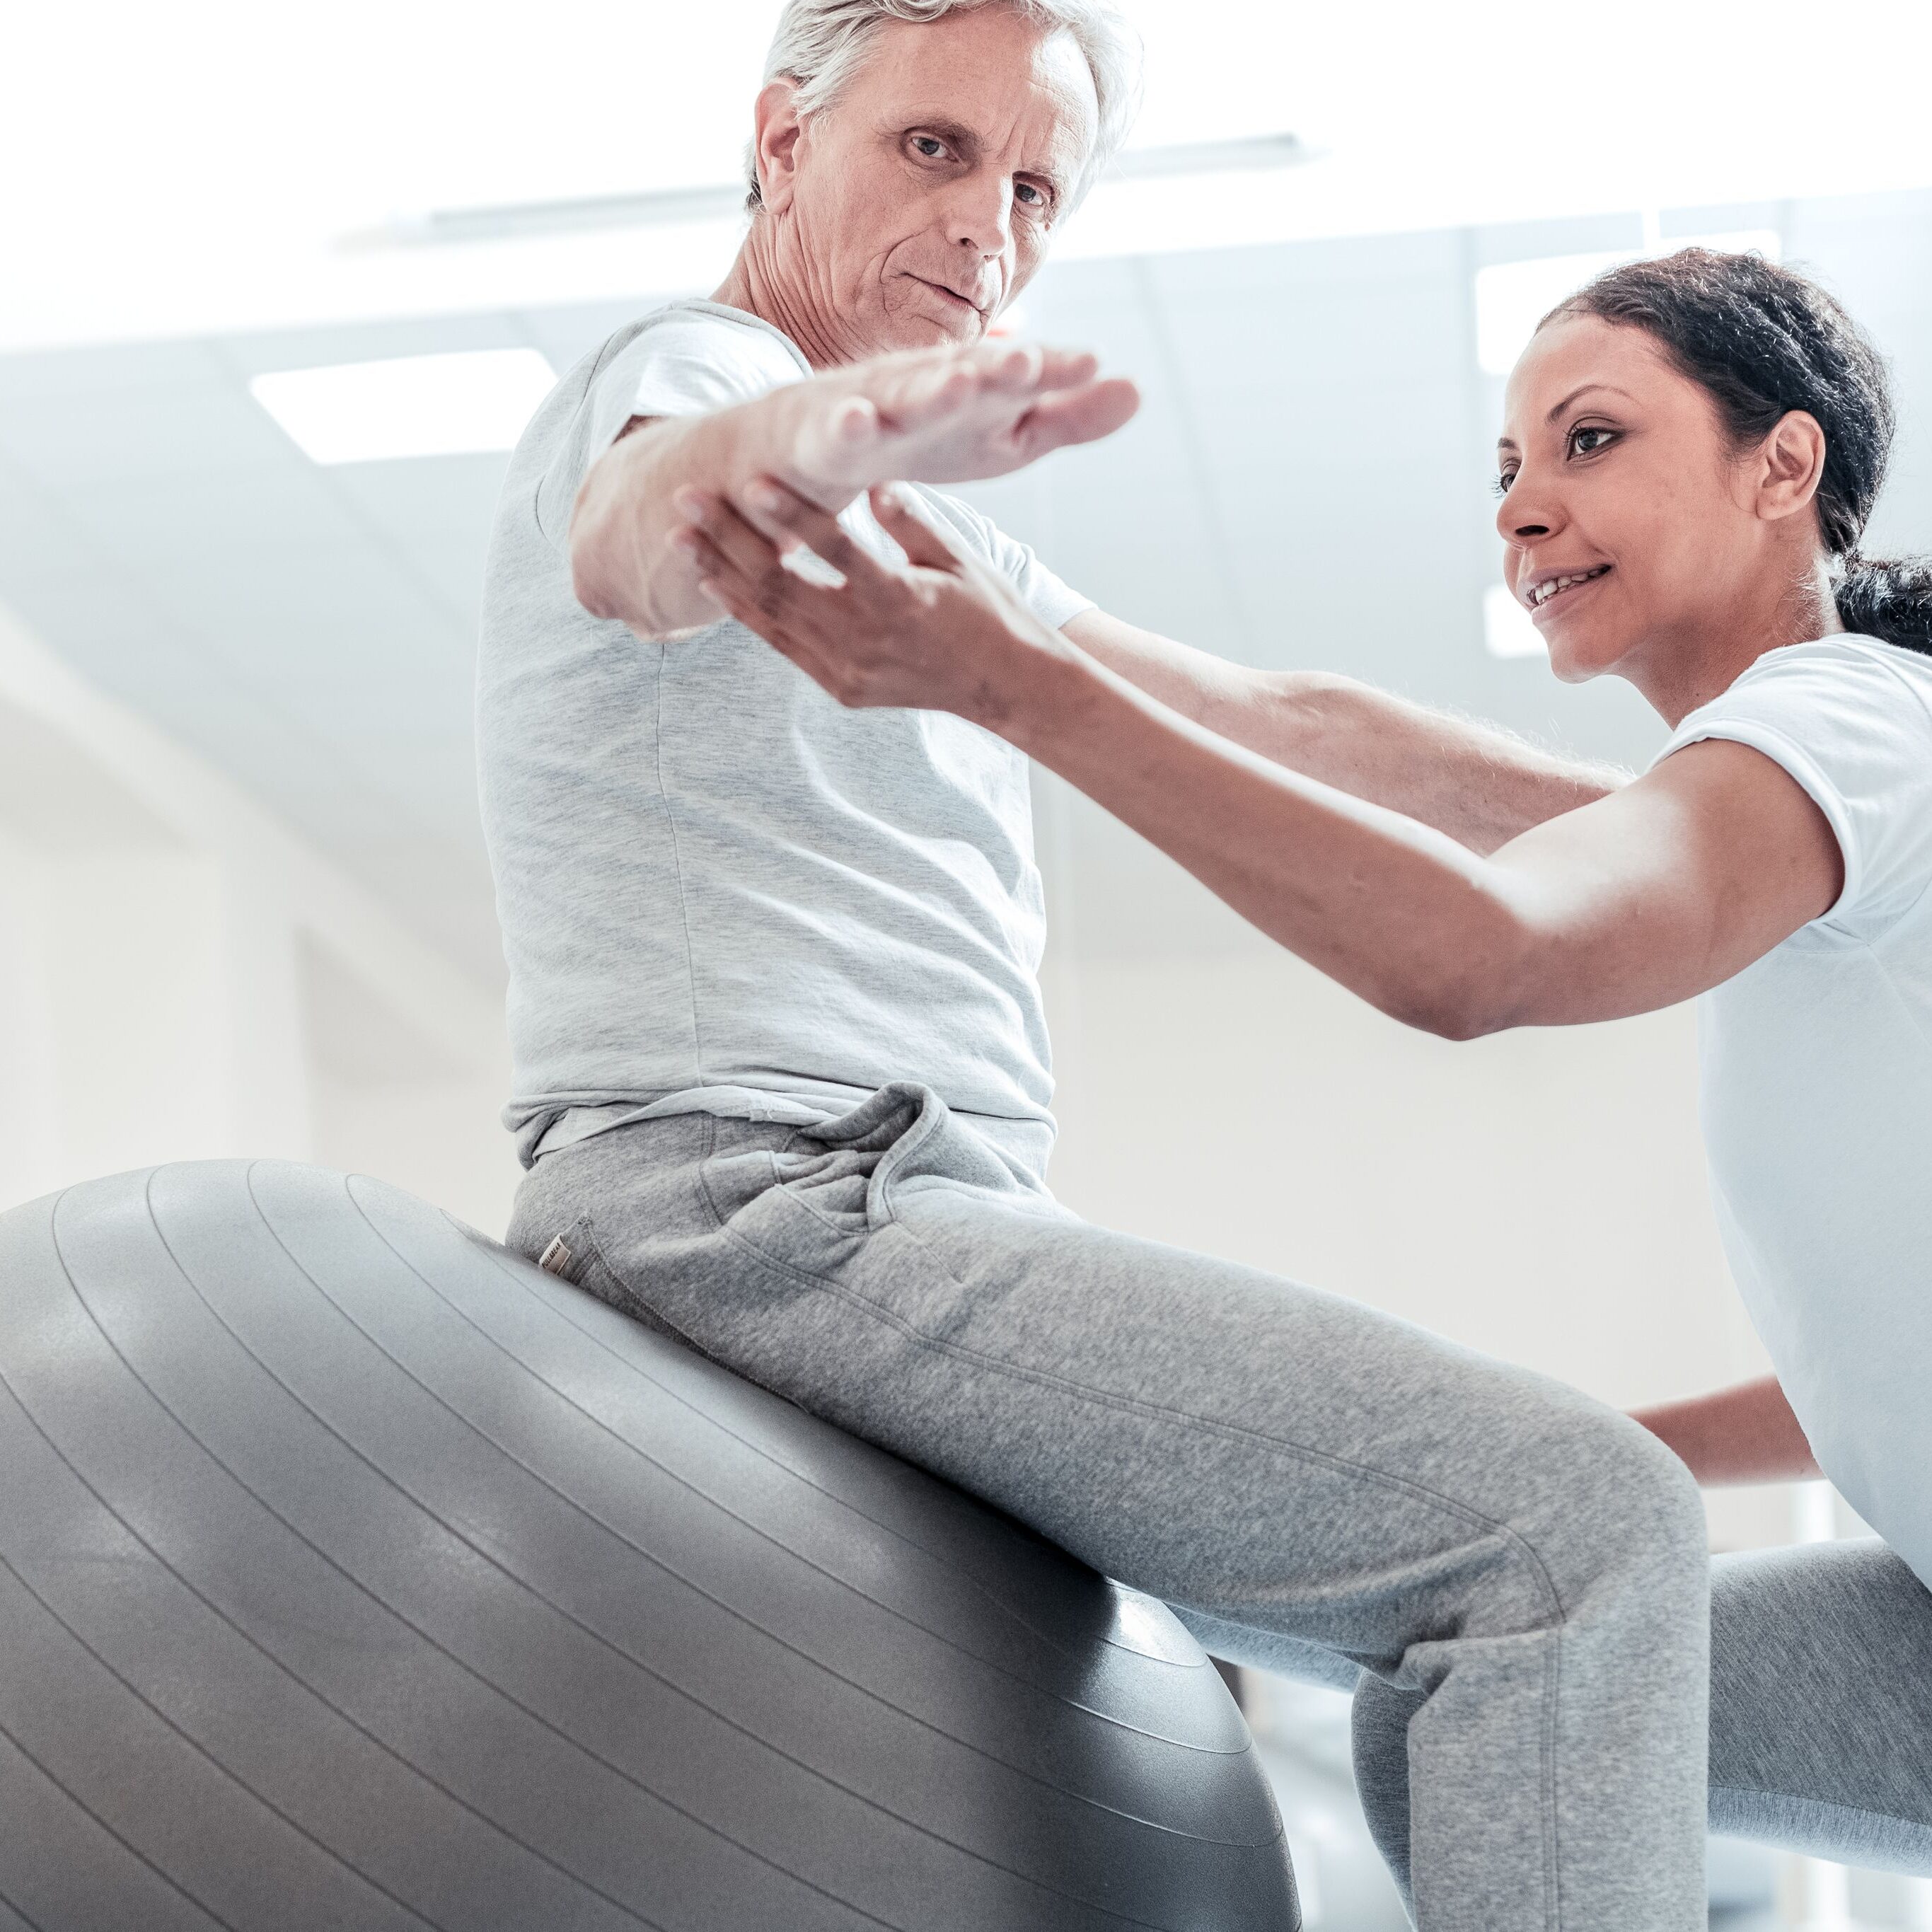 stock-photo-very-good-determined-old-wrinkled-grey-haired-man-sitting-on-a-ball-for-exercises-and-a-pretty-1028463184